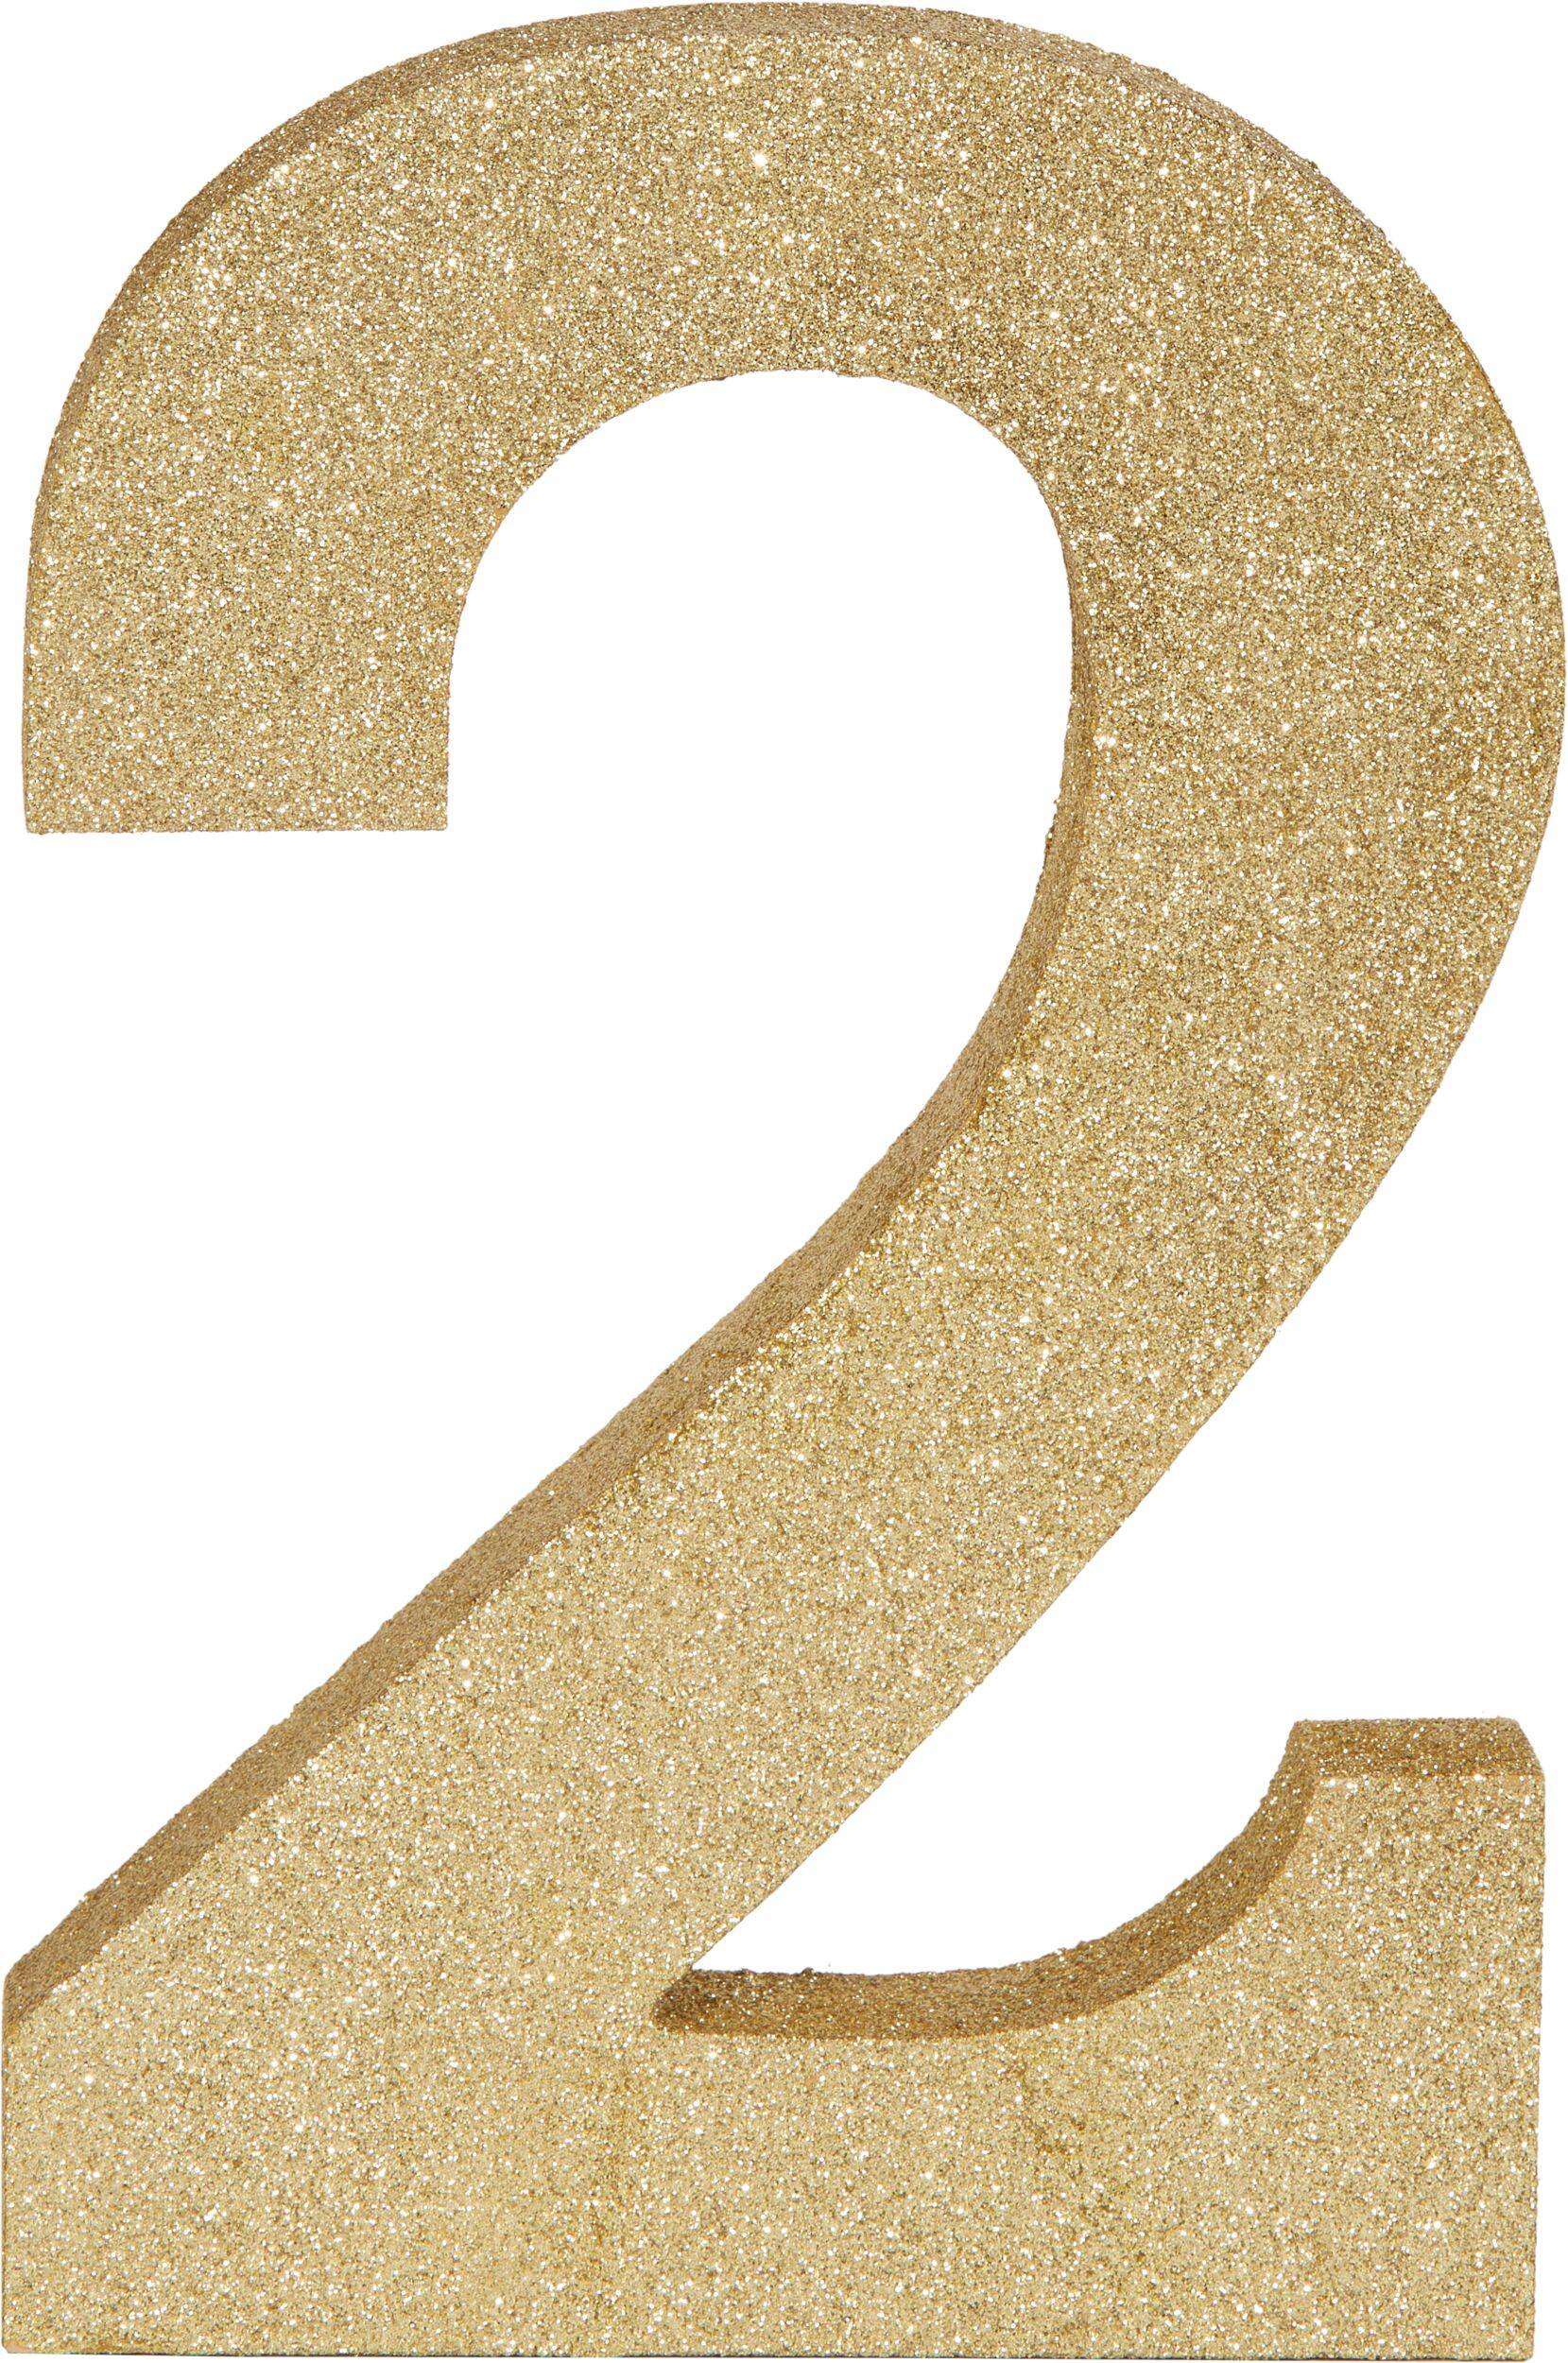 Glitter Gold Number Sign | Party City